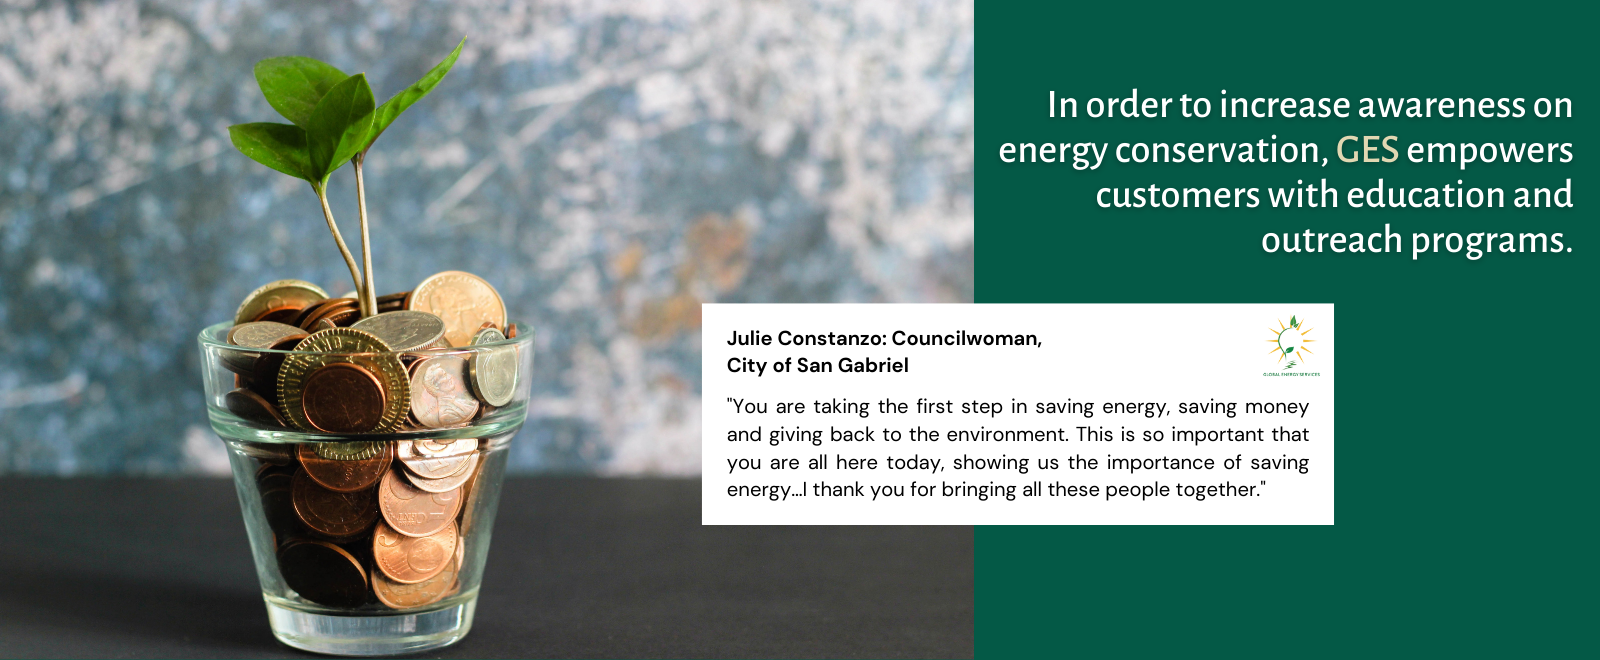 In order to increase awareness on energy conservation, GES empowers customers with education and outreach programs.